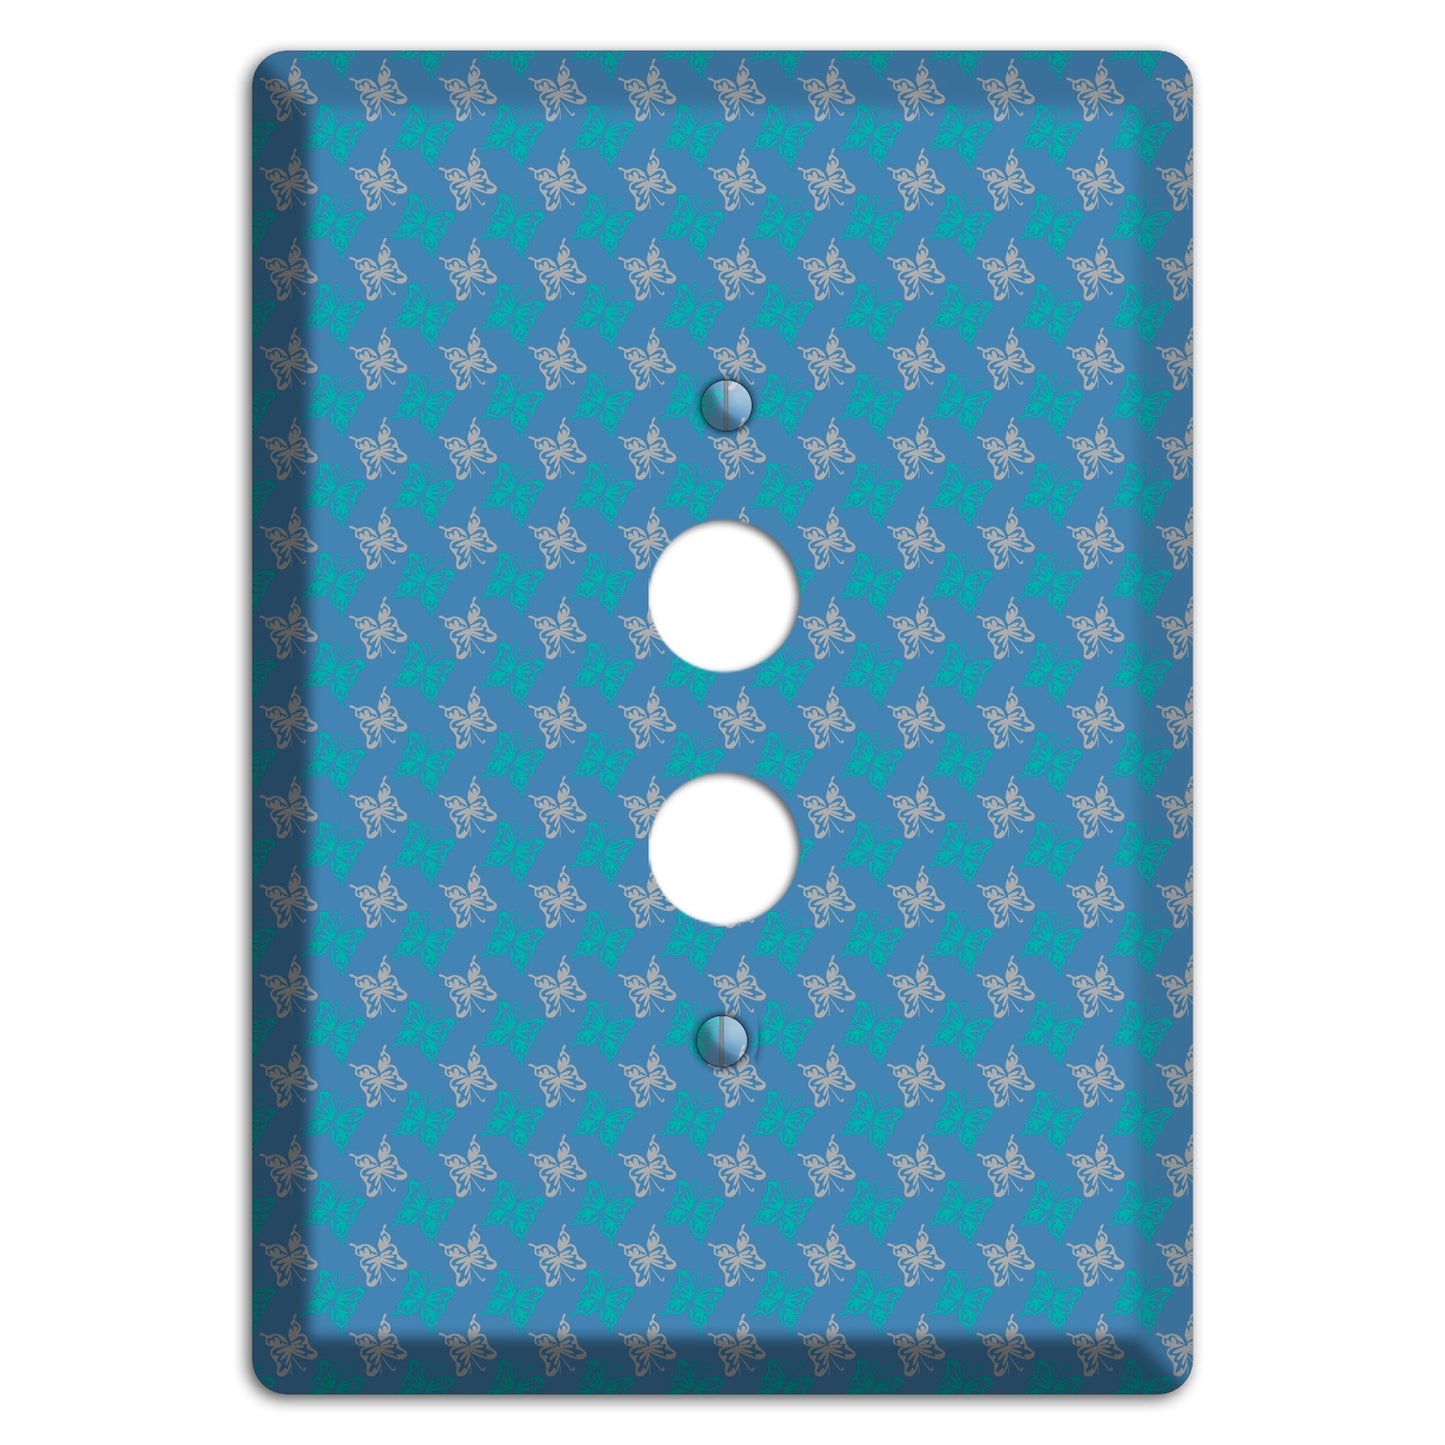 Blue with White and Turquoise Butterflies 1 Pushbutton Wallplate